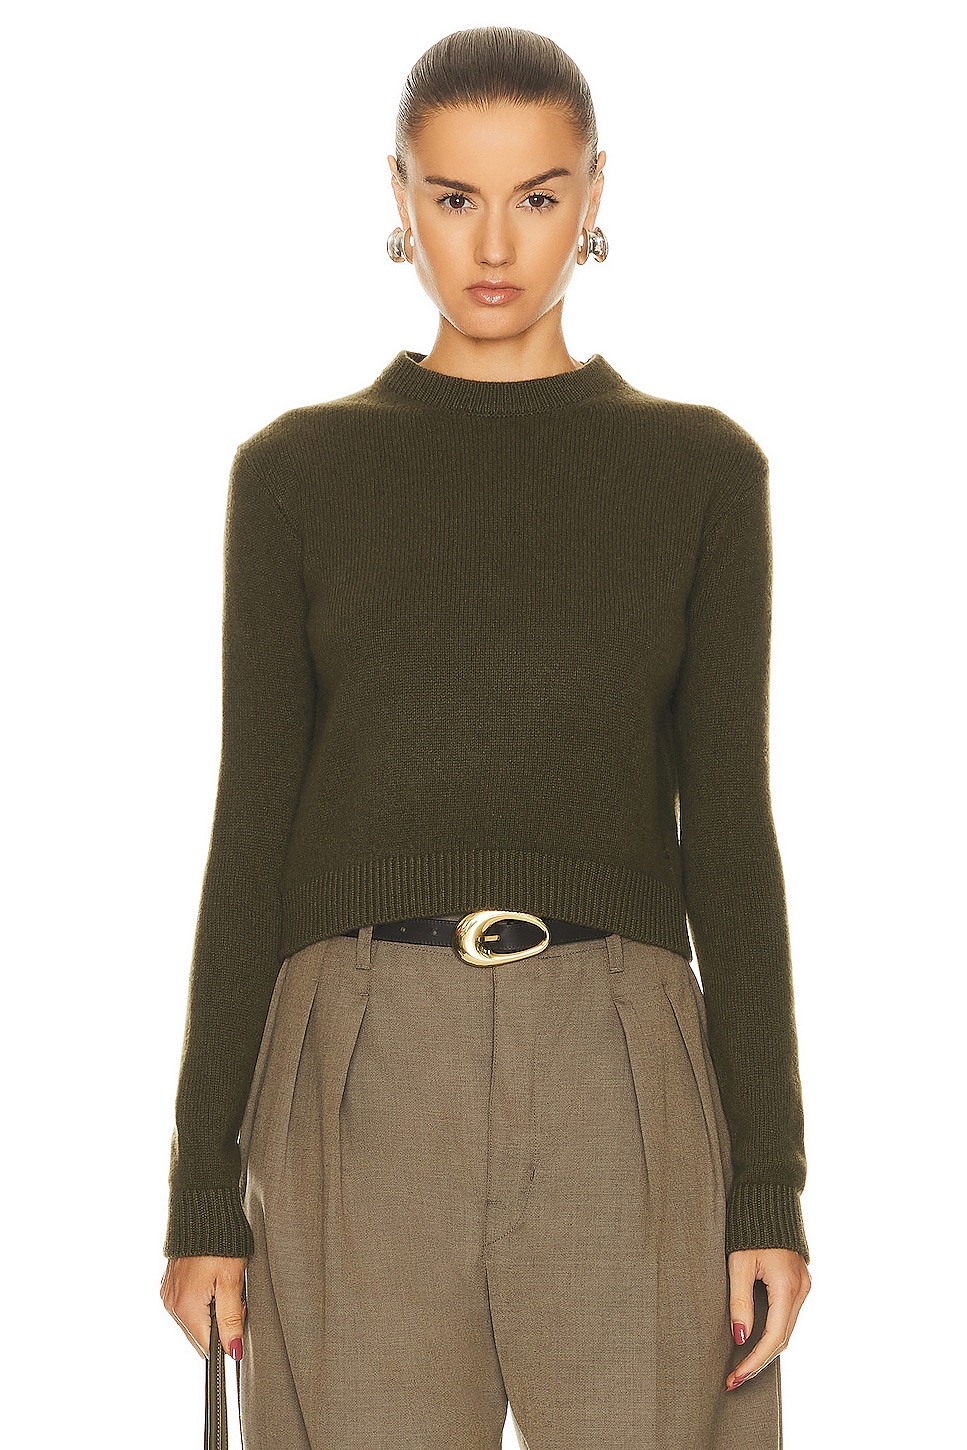 Simple Crew Sweater in Olive